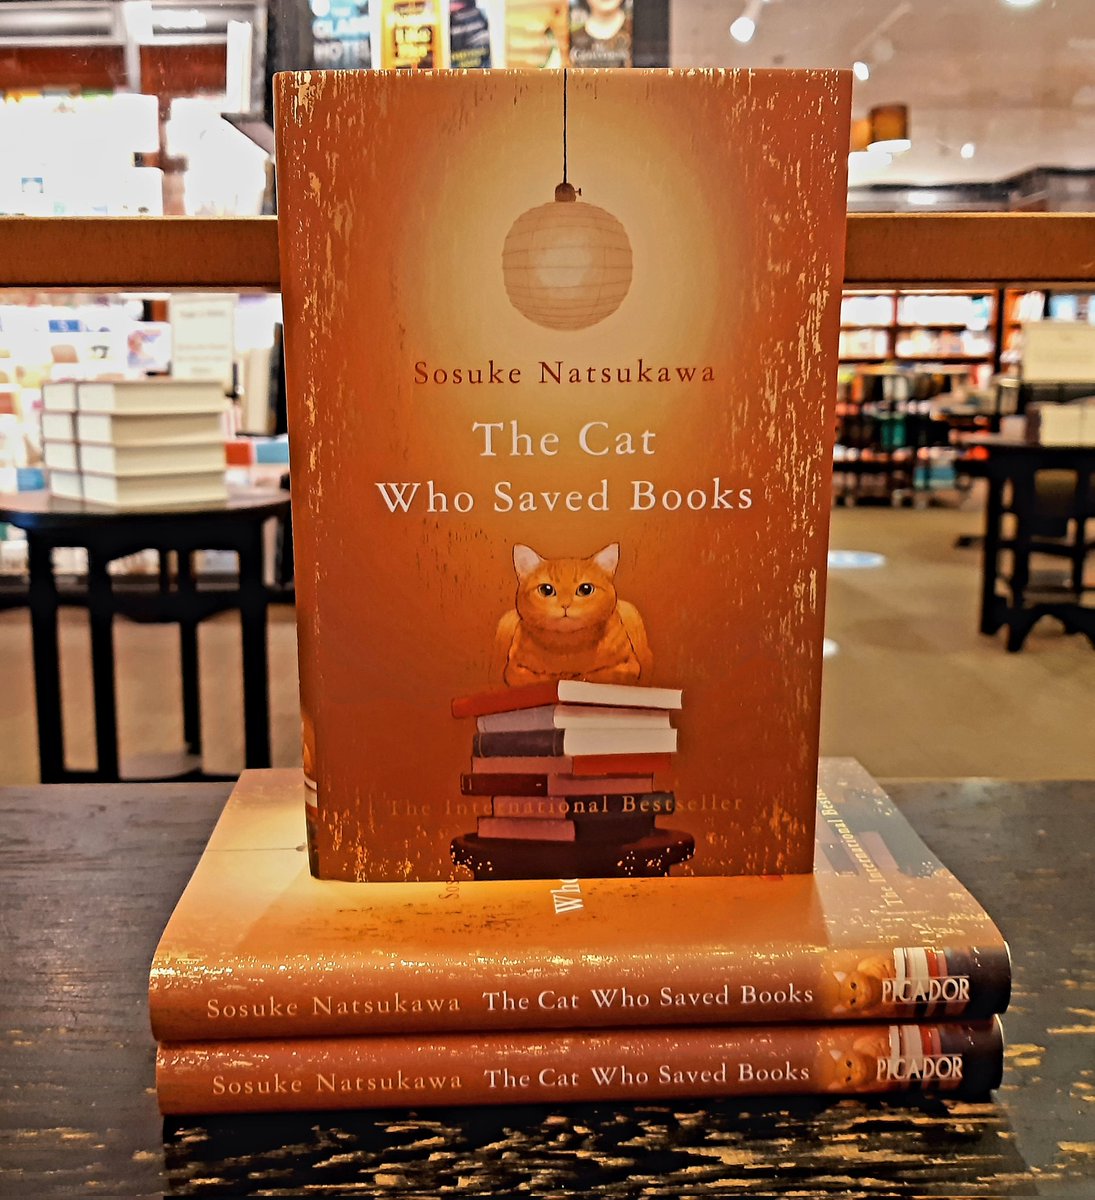 #TheCatWhoSavedBooks 🐈📚 is one of the most magical, heart-warming stories I've read in a long time. A story of loss, friendship, bravery and the importance of books.